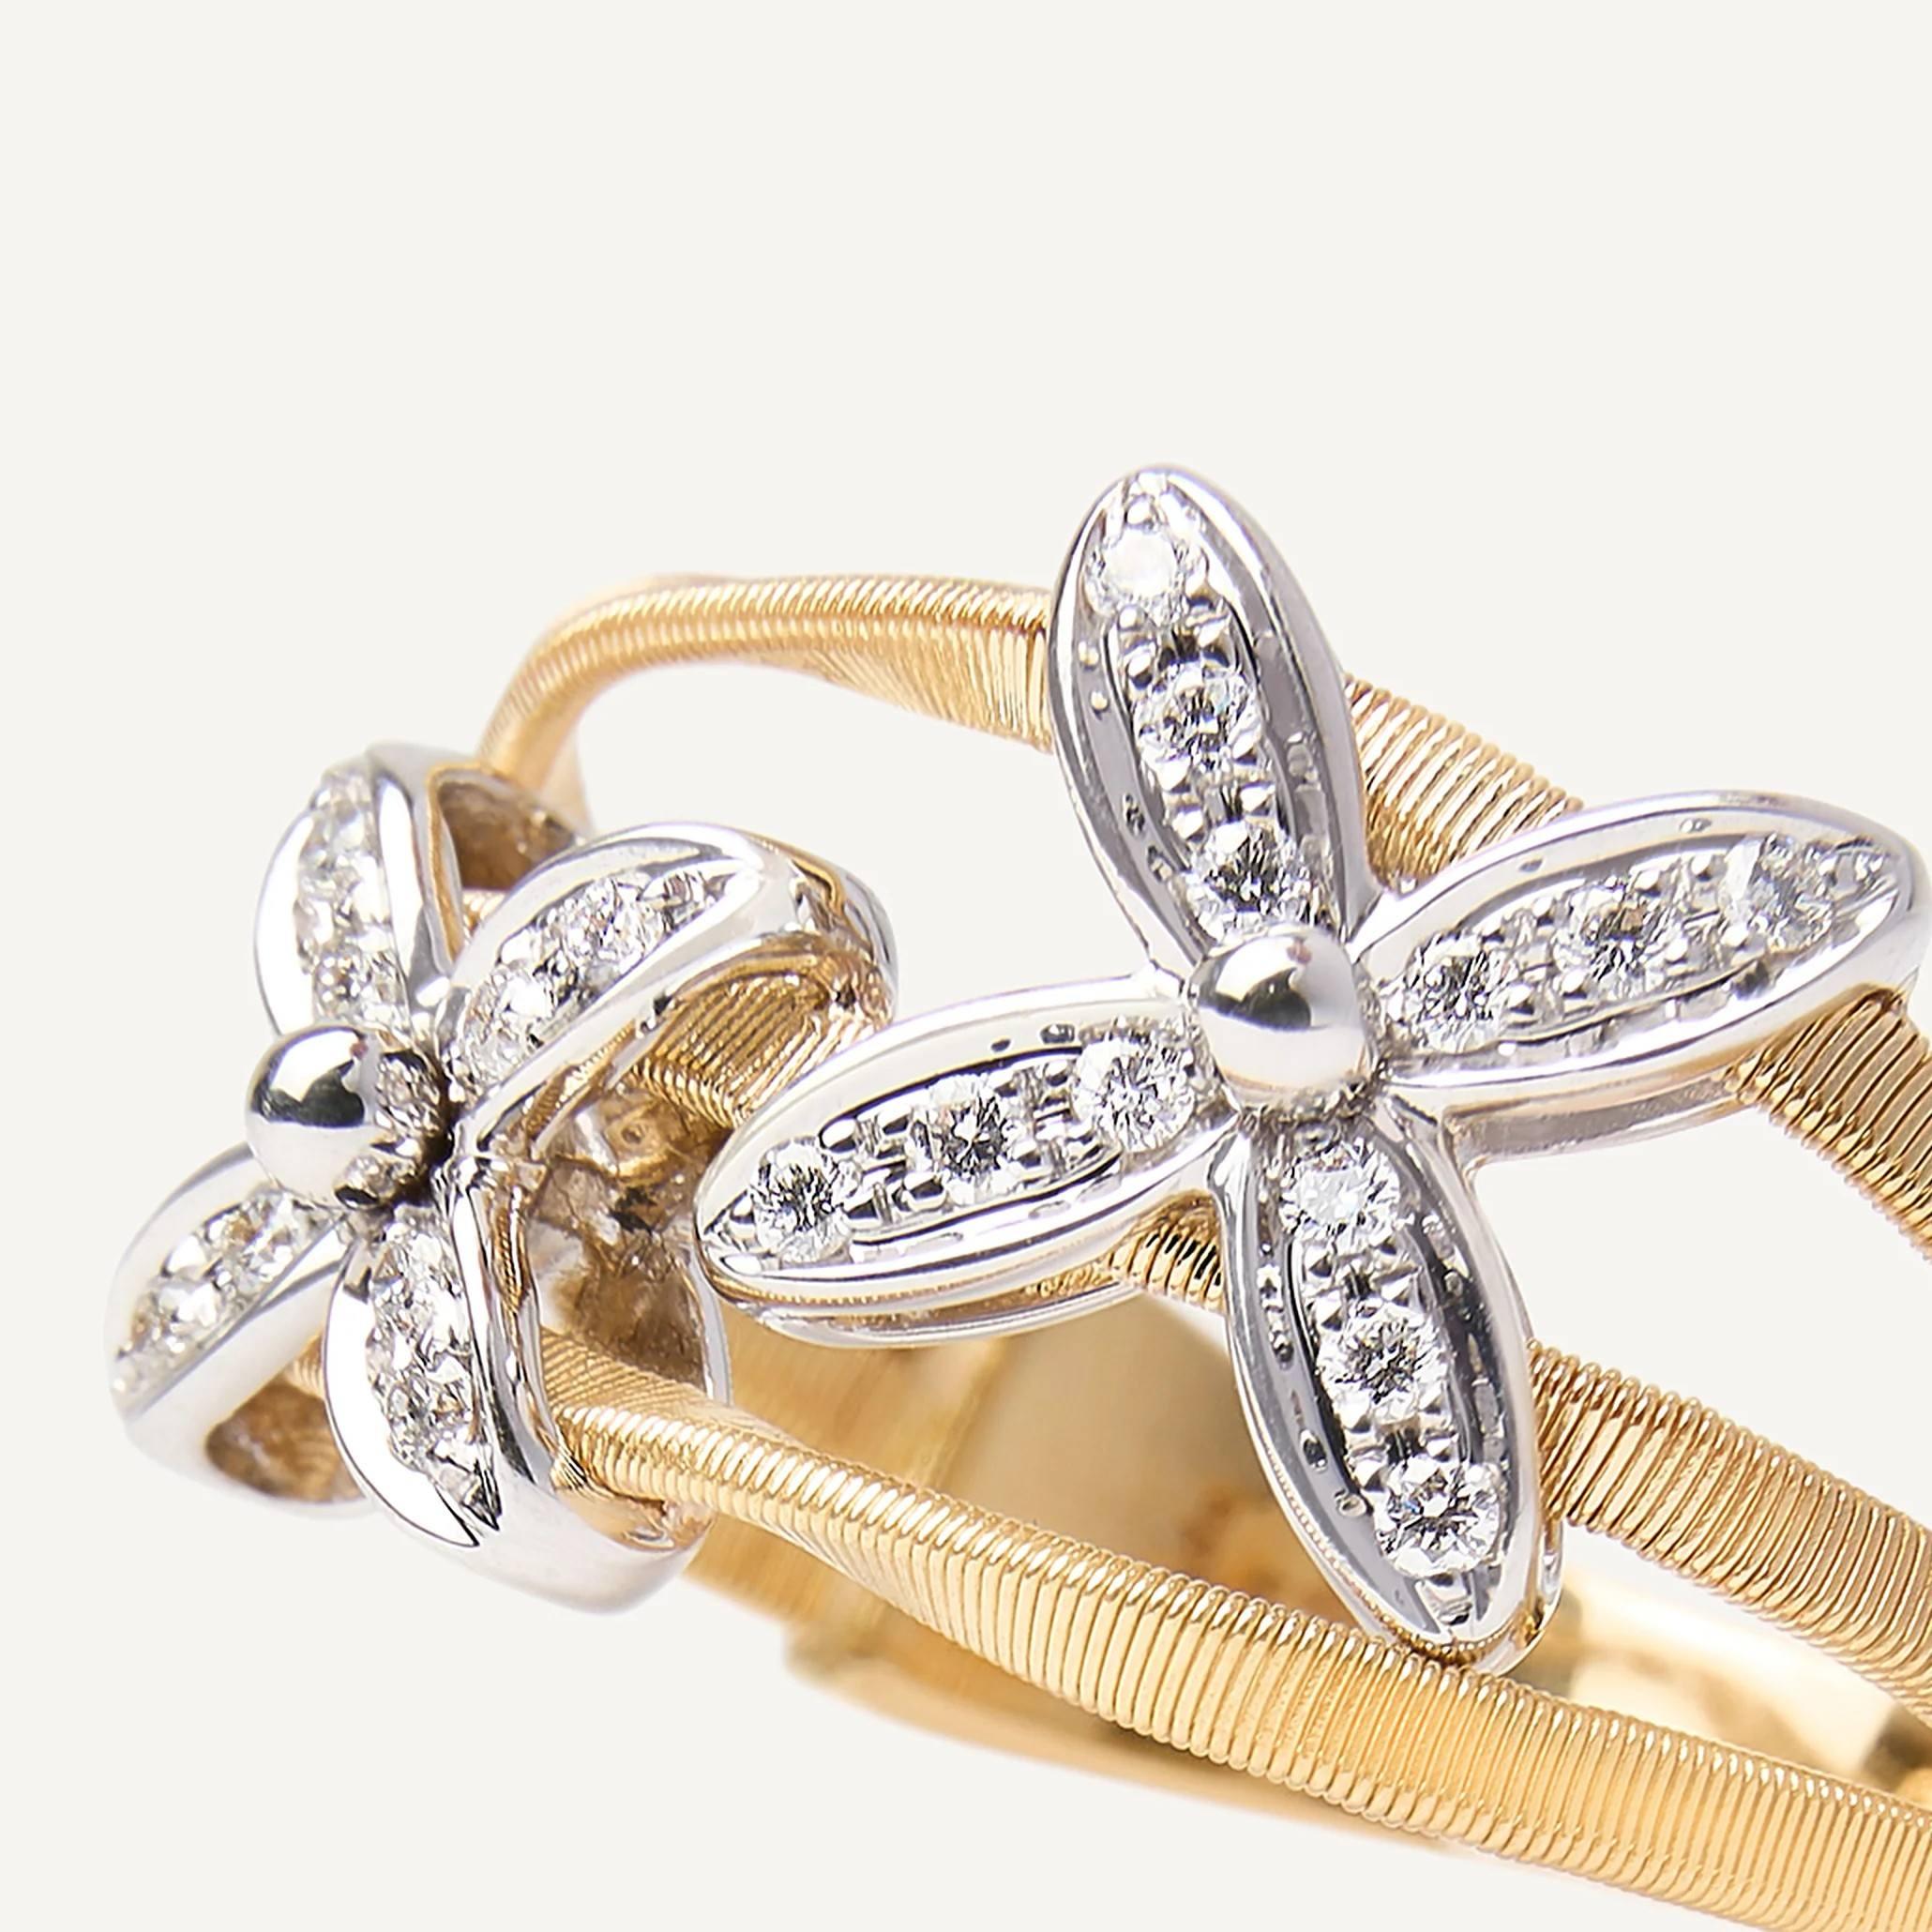 Marco Bicego Marrakech Onde Collection 18K Yellow and White Gold Ring with Two Diamond Flowers 1